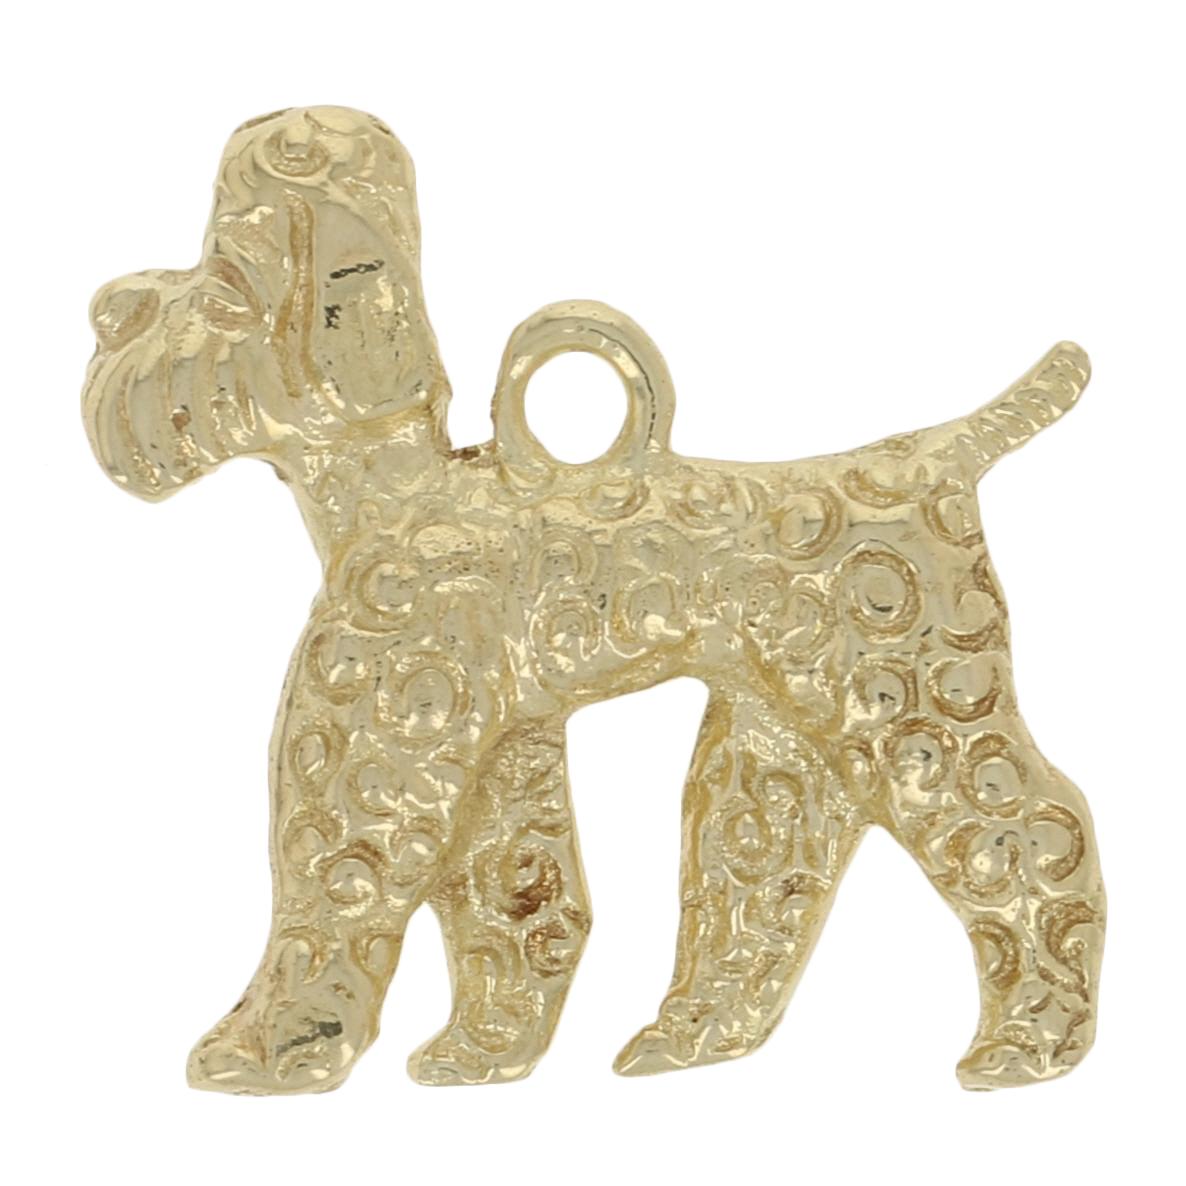 Women's Airedale Terrier Charm, 14k Yellow Gold Textured Canine Pet Dog